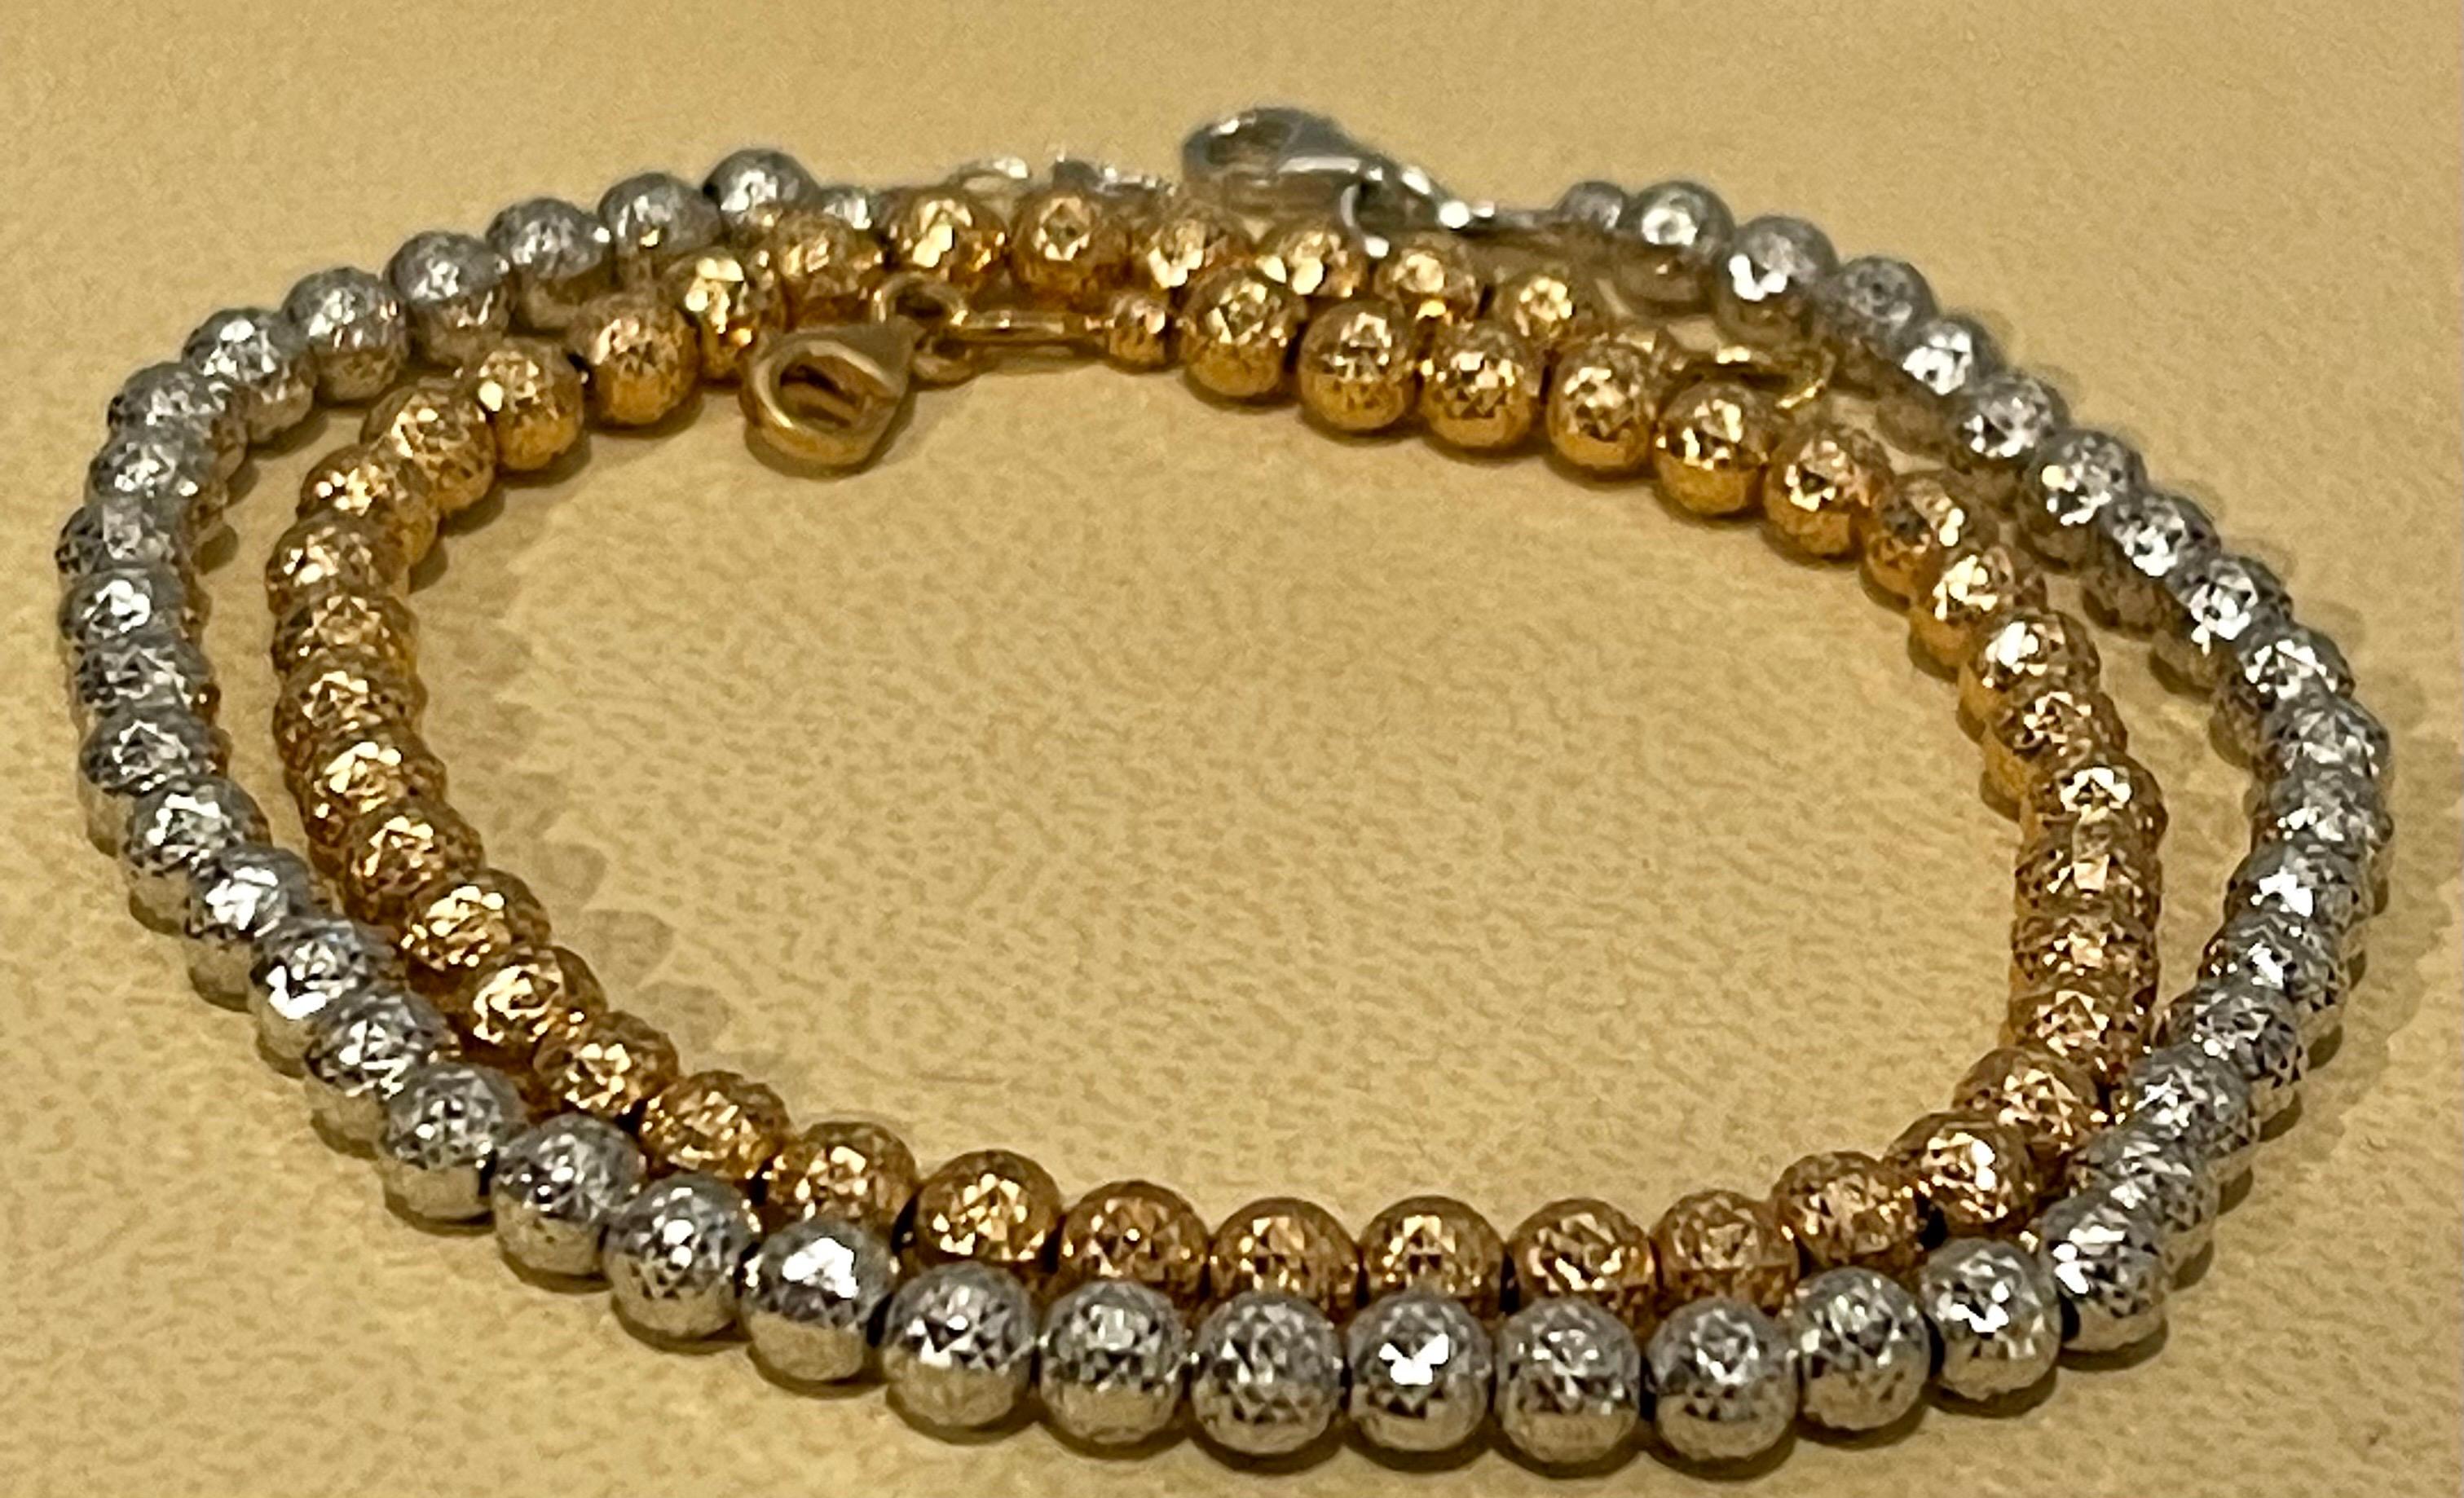 very fashionable , Beaded bracelet 
Pair of 18 Karat White Gold/ Rose Gold Ball Bracelets, 8.2 Gm, Length 7.5 Inch
Two Bracelet , one in White gold and one in Rose gold
each 7.0 Inches long bracelet
Beautiful ball design and lobster clasp
Weight of